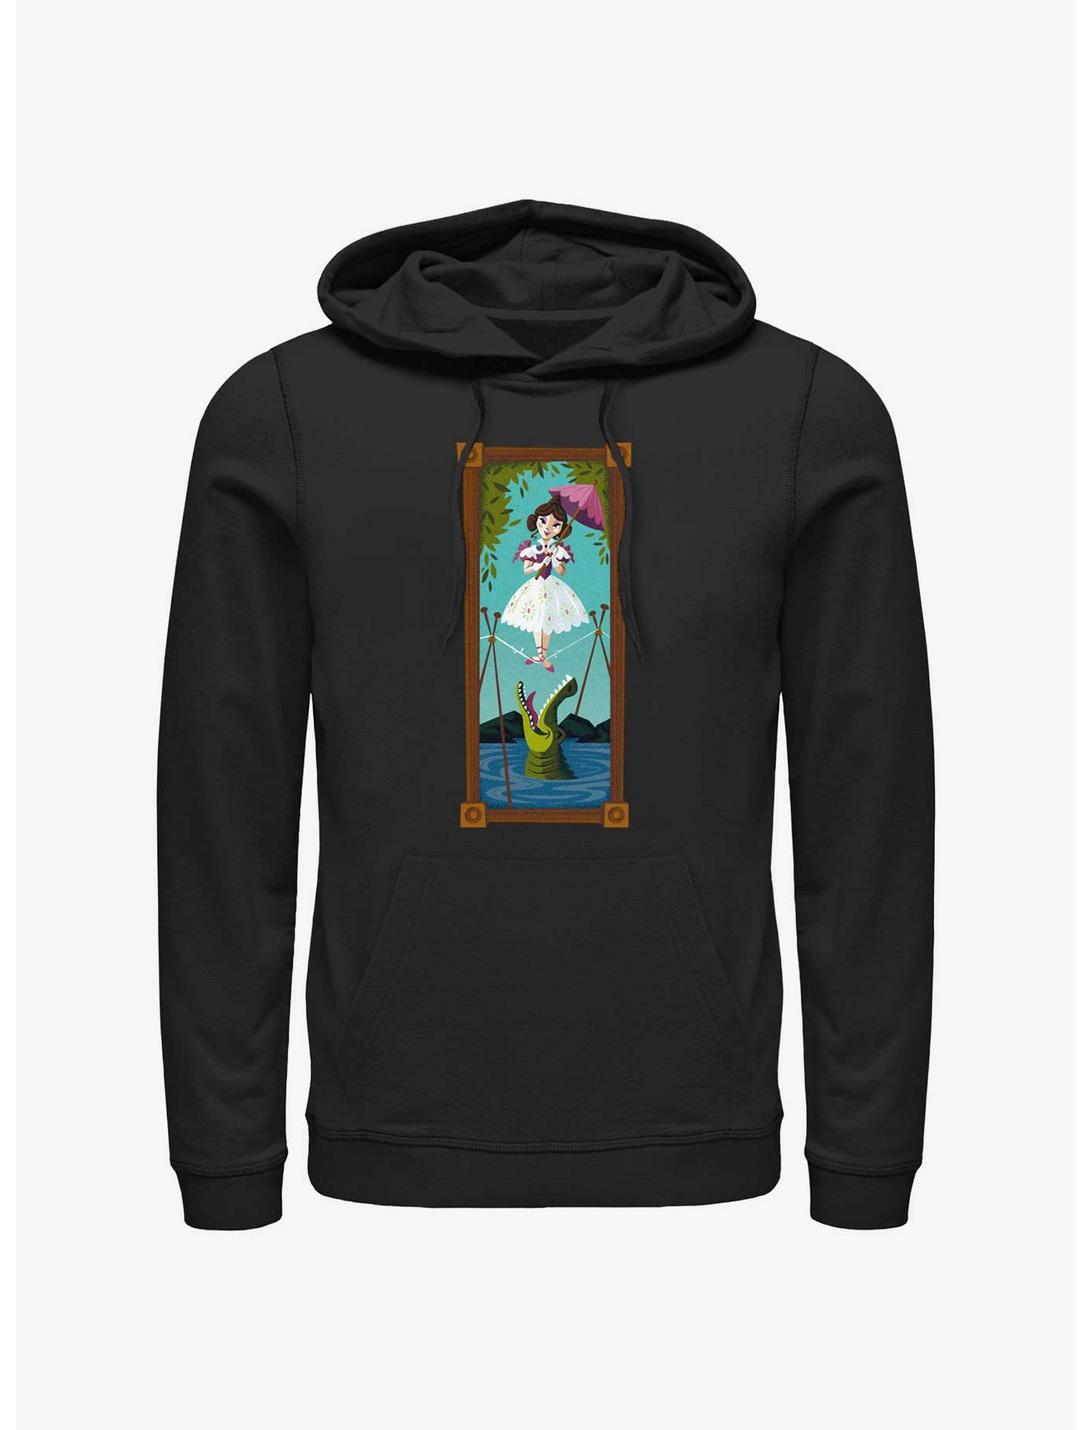 Disney The Haunted Mansion The Tightrope Walker Portrait Hoodie Hot Topic Web Exclusive, BLACK, hi-res